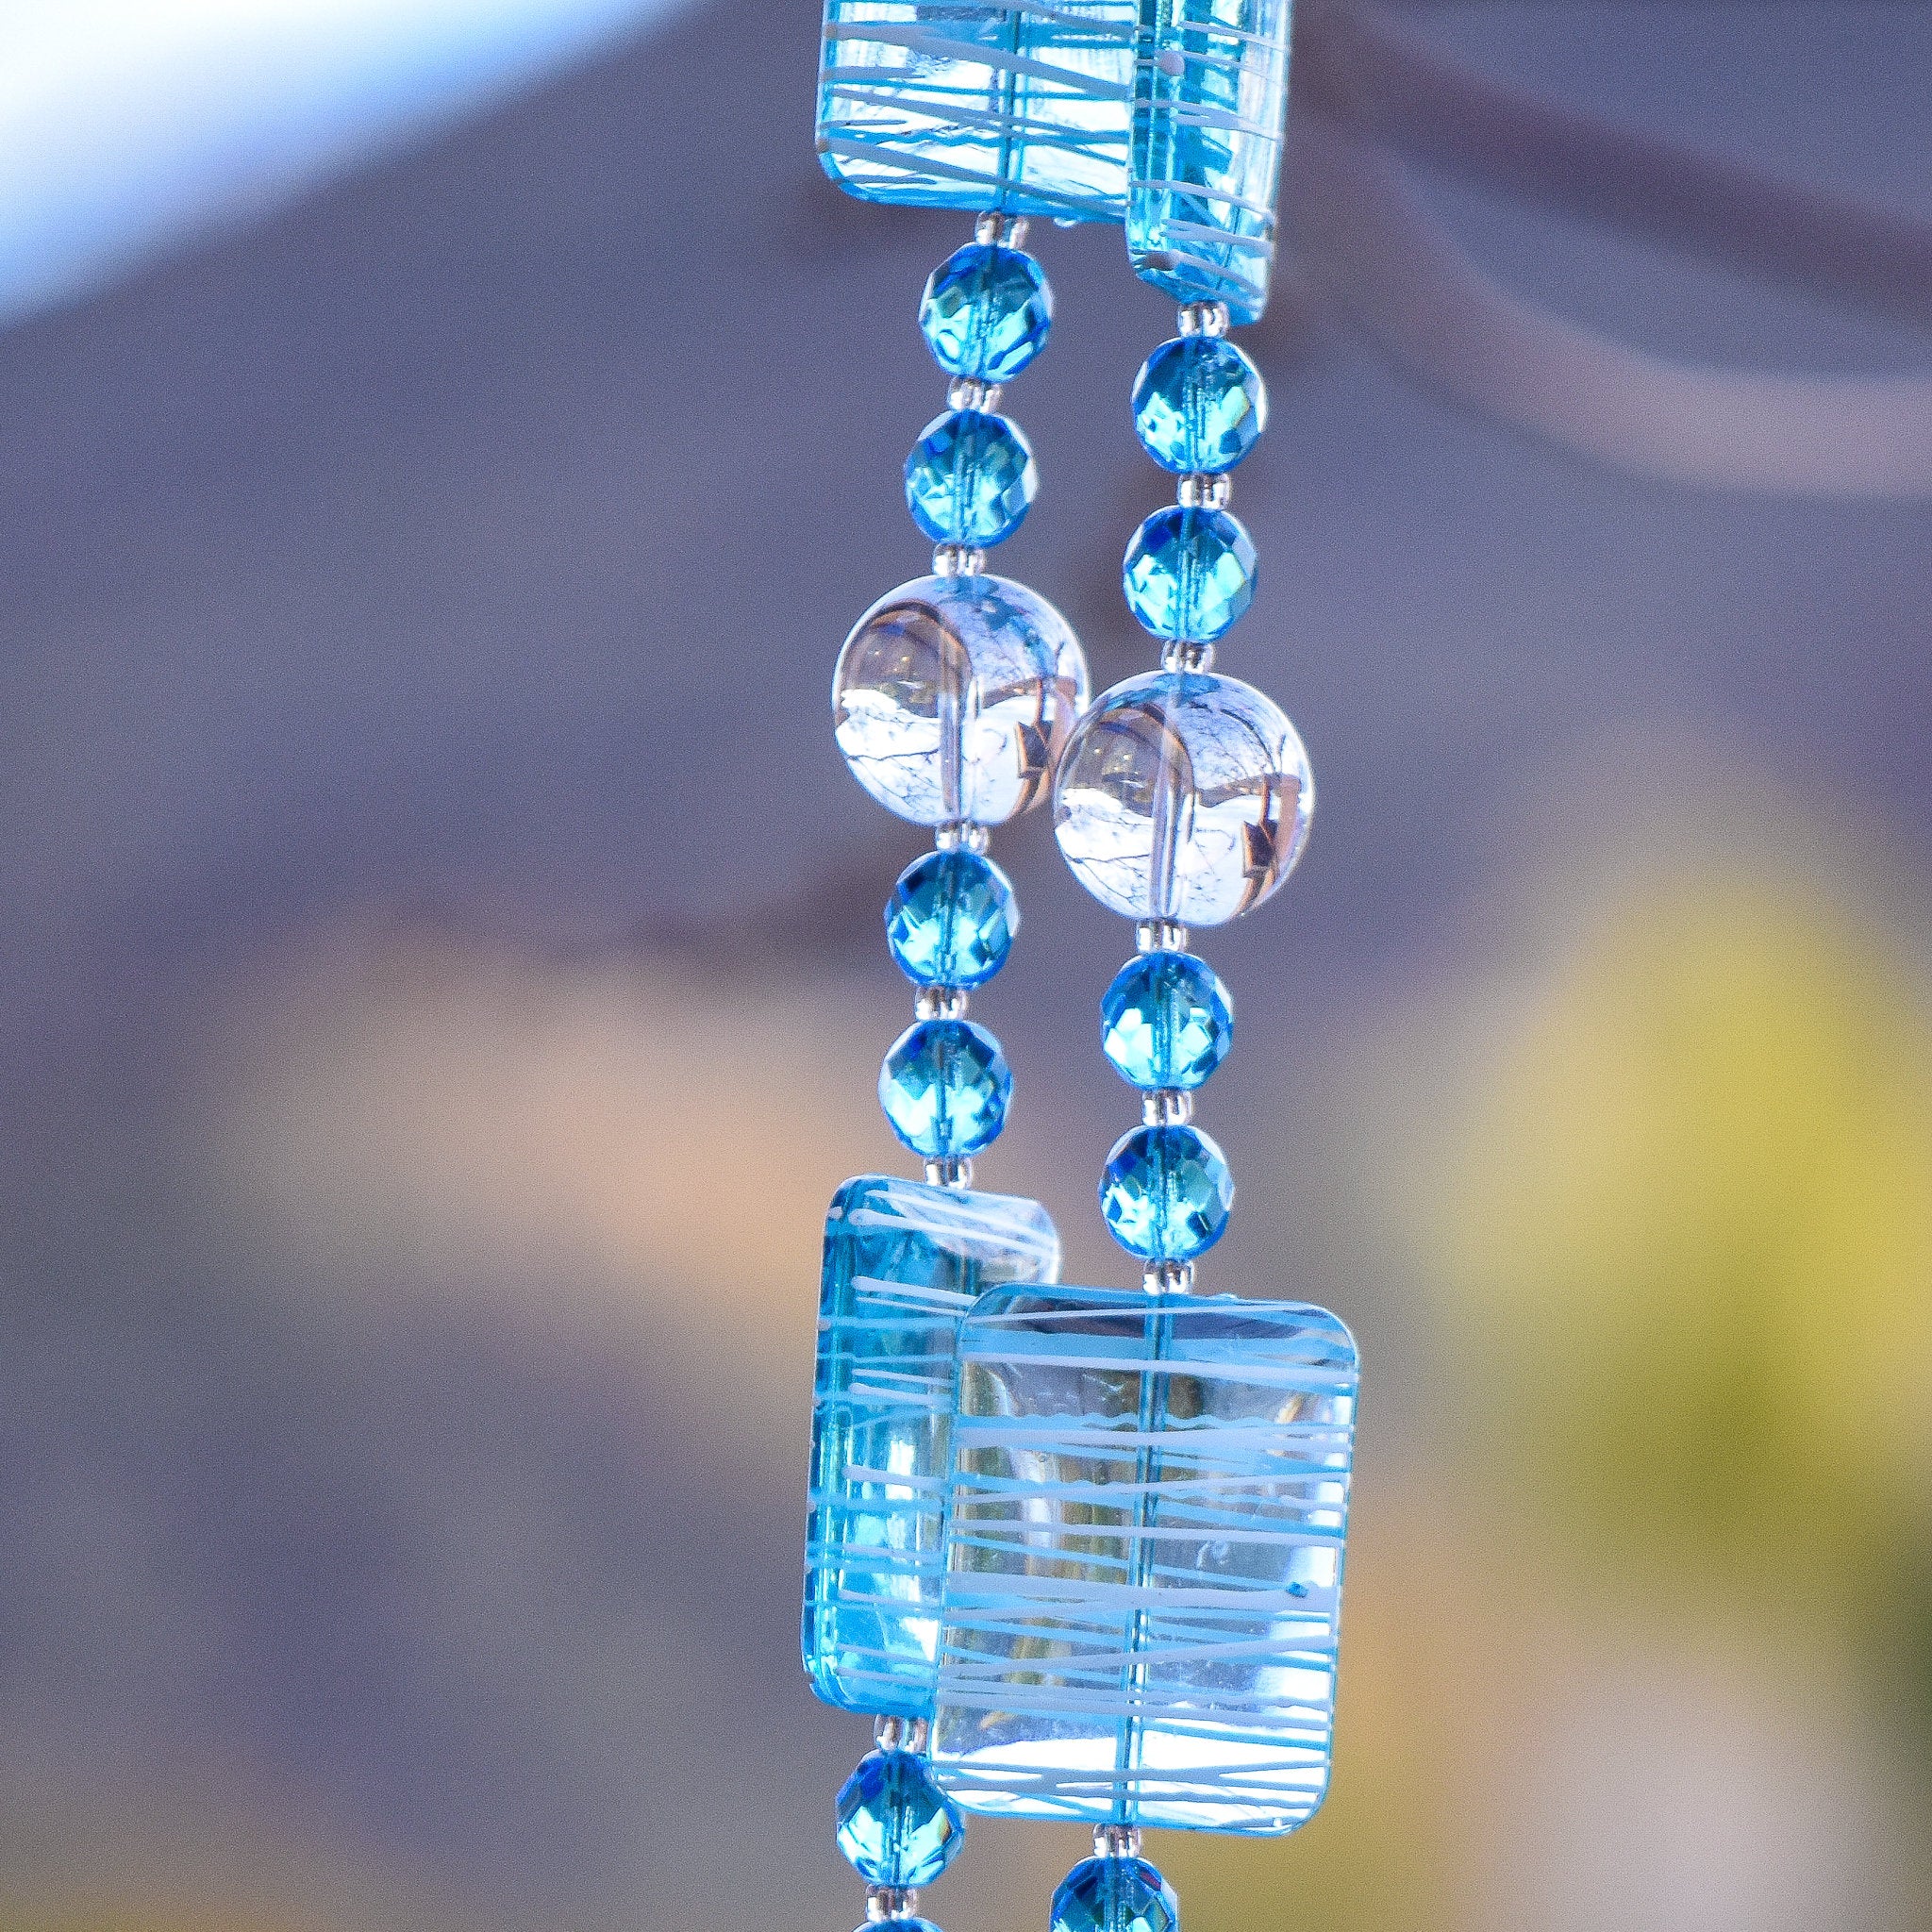 Blue Sun-Catcher Wind Chime for Outdoor Patio, Porch, Balcony or Garden is a Unique Gift for the Home